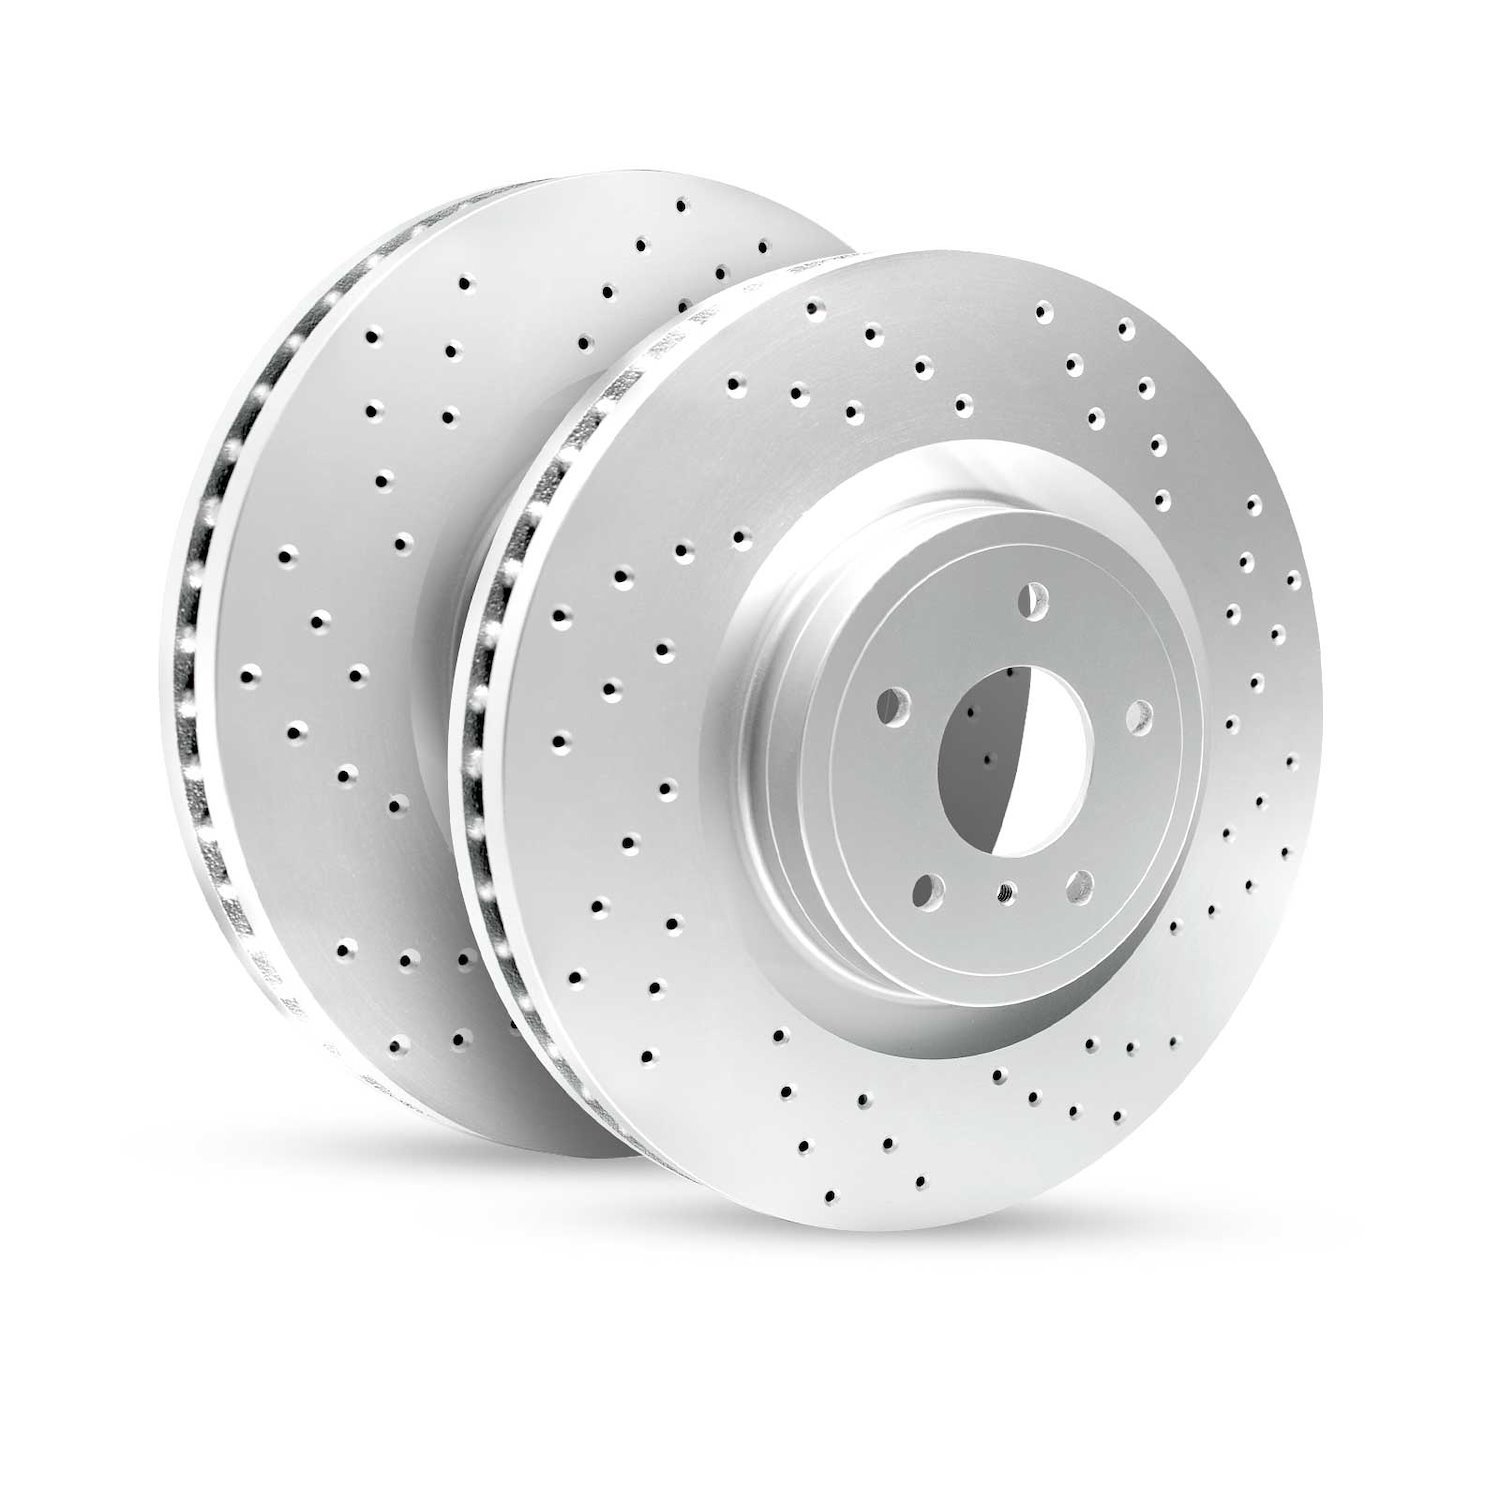 GEO-Carbon Drilled/Slotted Rotors, 1998-2002 Mercedes-Benz,